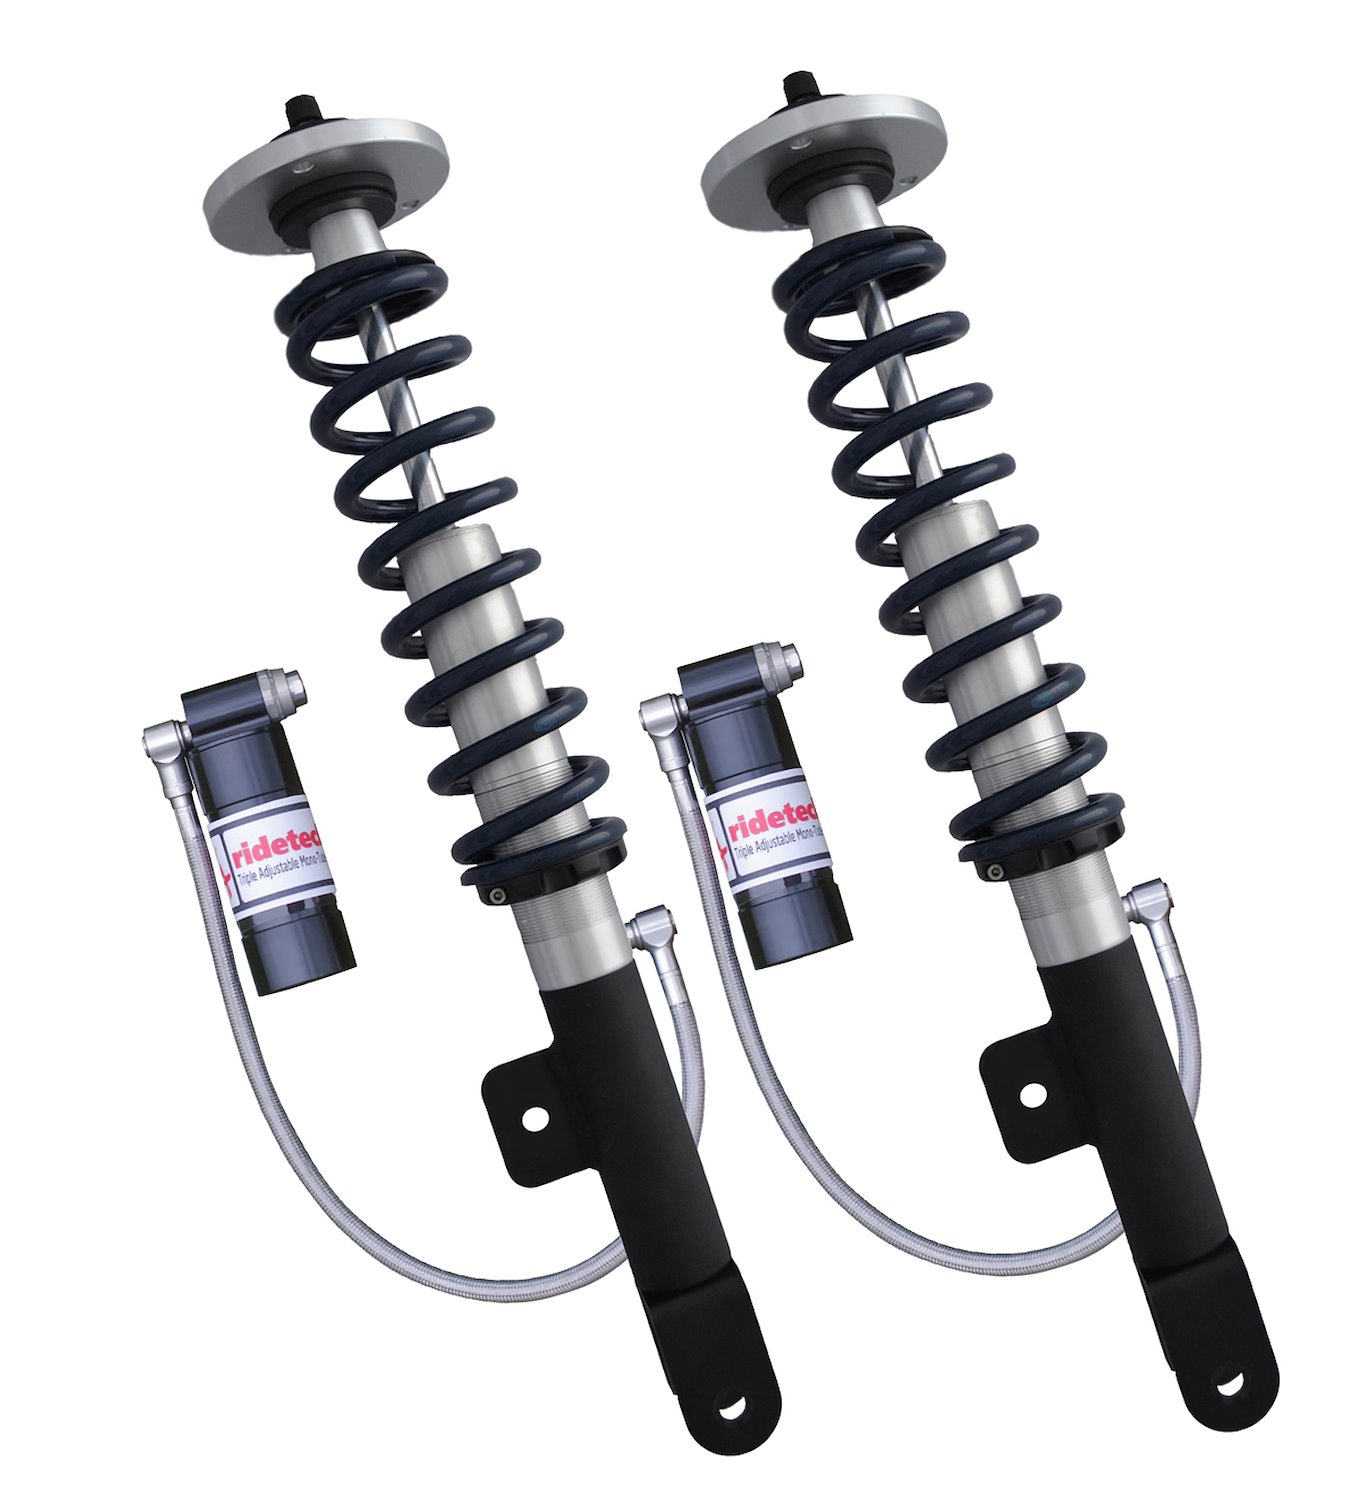 TQ Series front CoilOvers for 04-up Charger Challenger 300C and Magnum. Sold as pair.